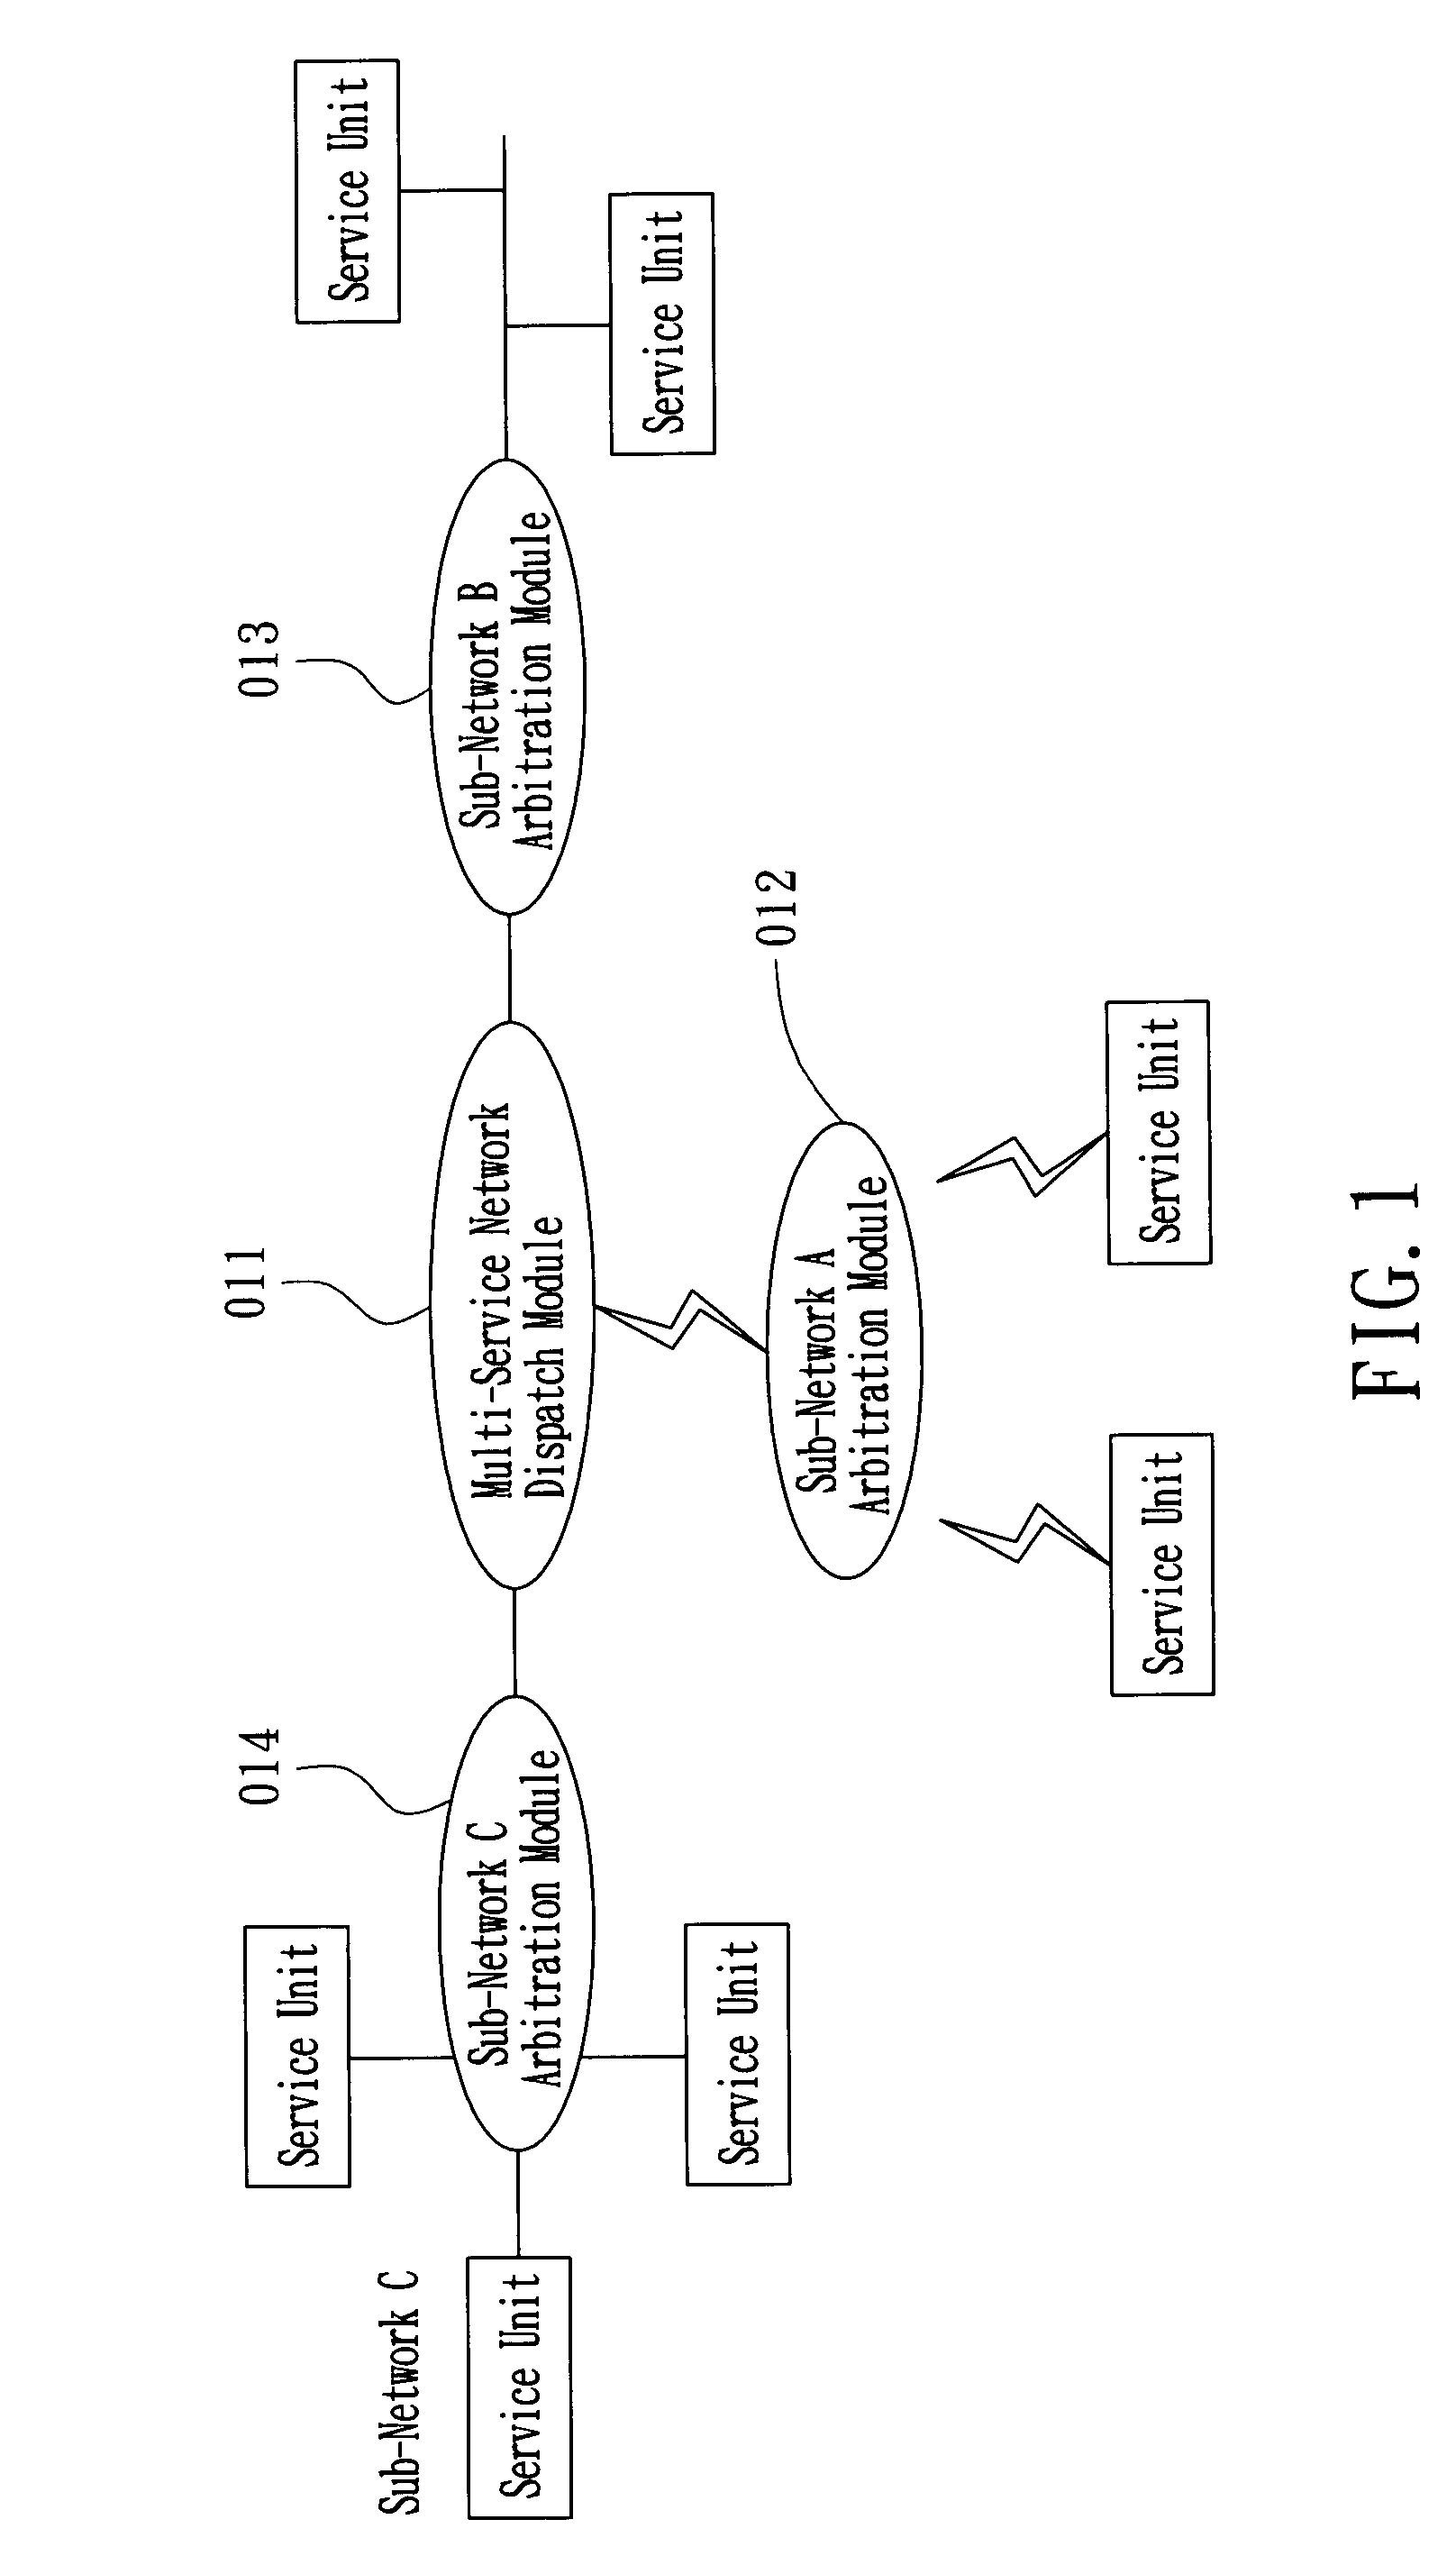 Multiple service method and device over heterogeneous networks